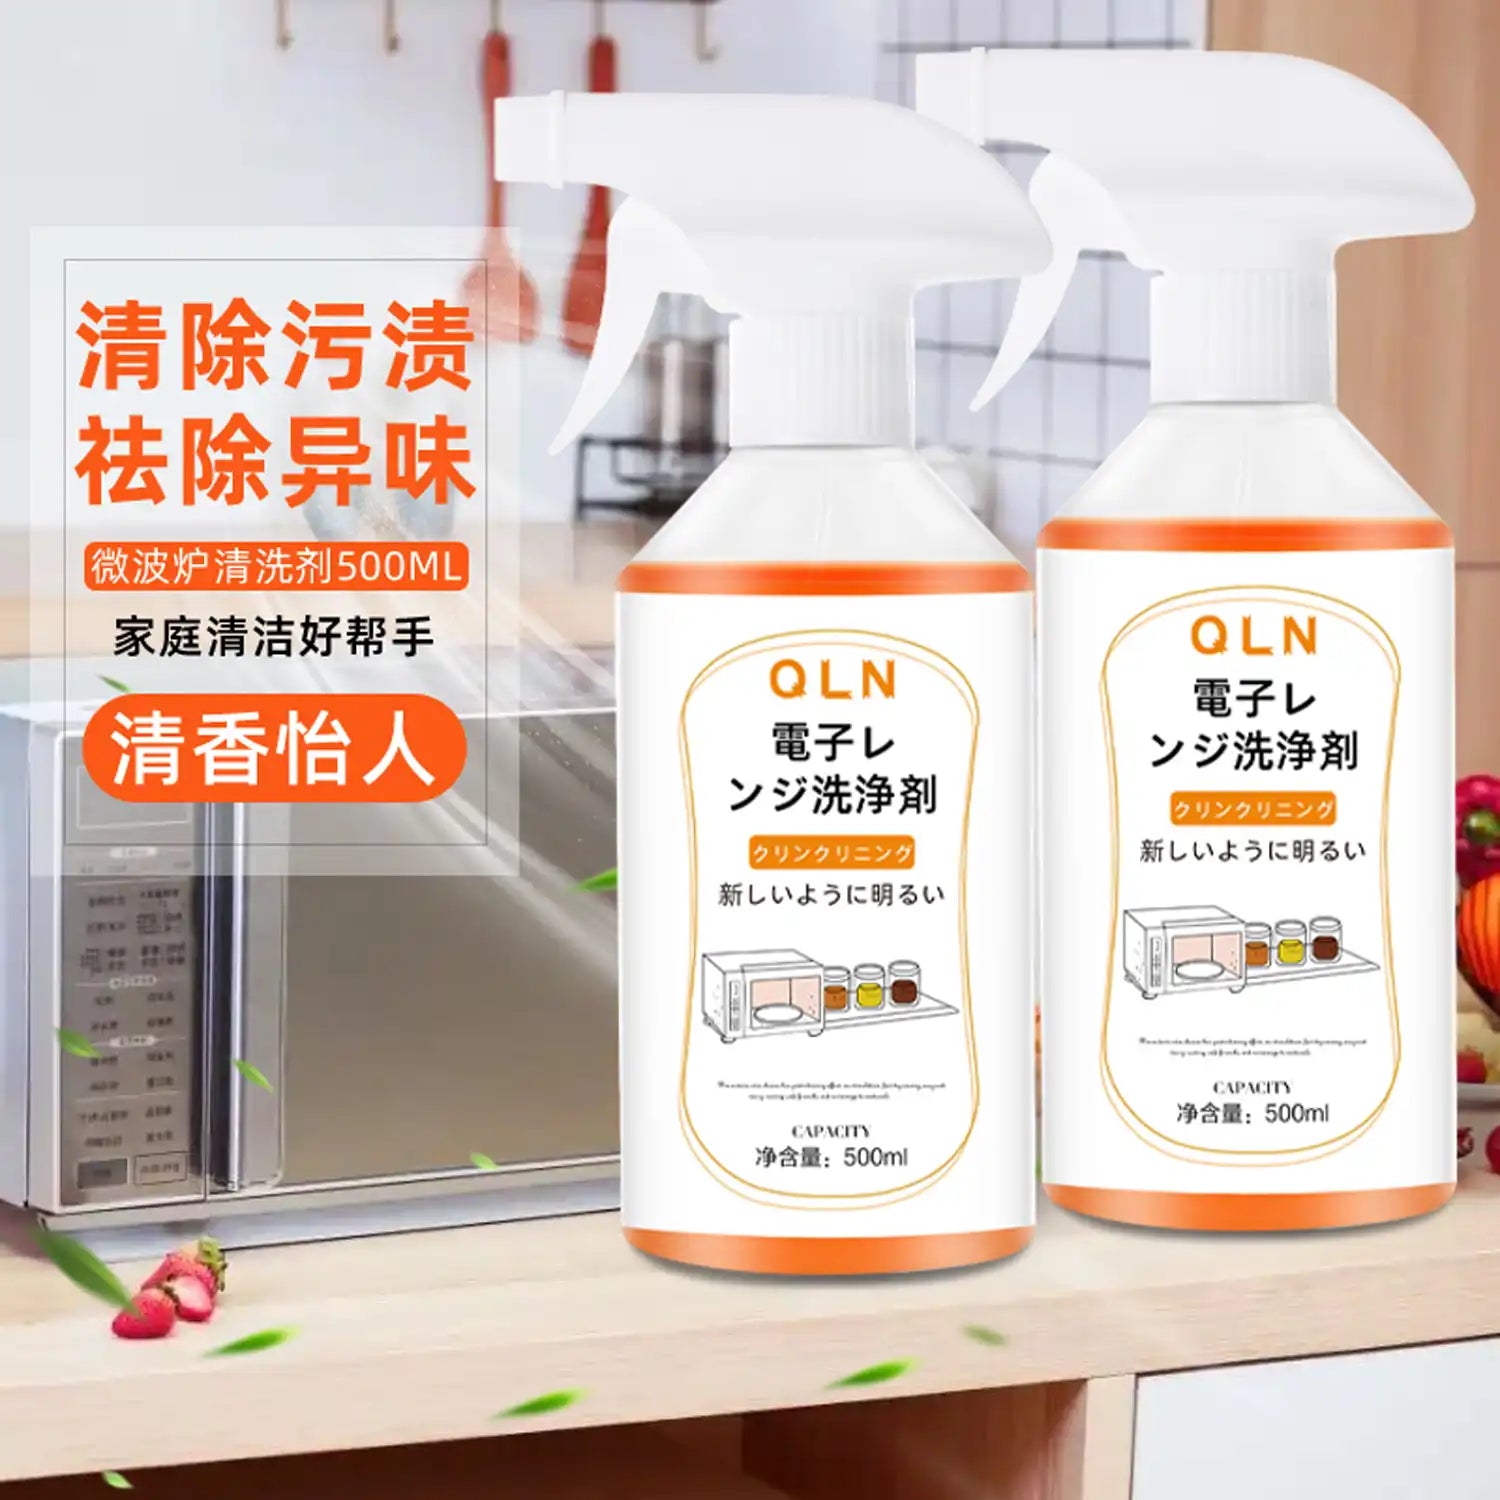 Strong Microwave Oven Cleansing Oil Dirt Cleaner Household Kitchen Descaling Detergent 500ML